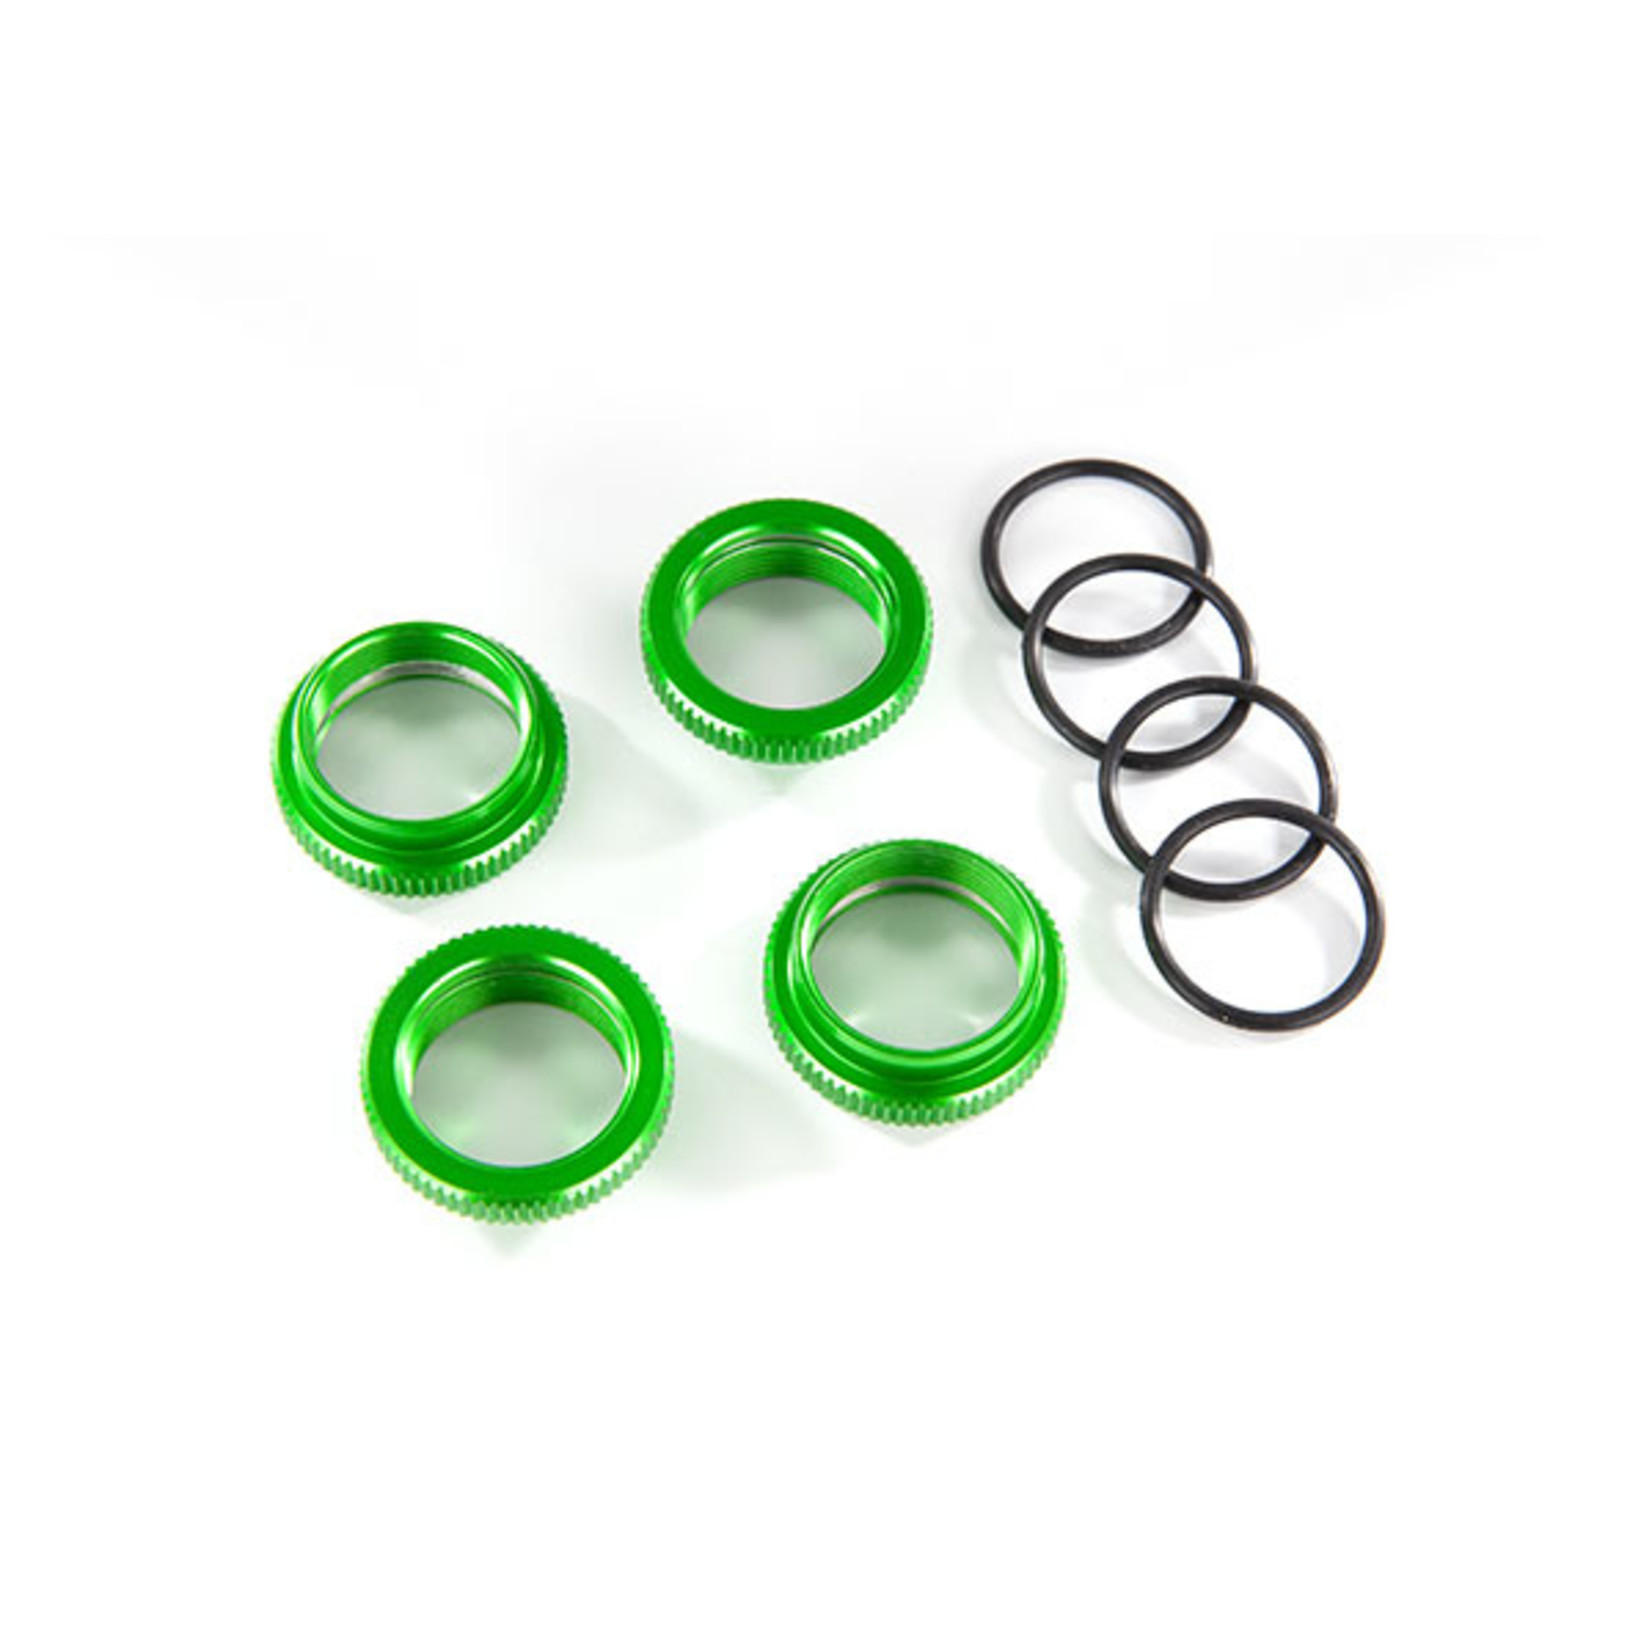 Traxxas 8968G - Spring retainer (adjuster), green-anodized